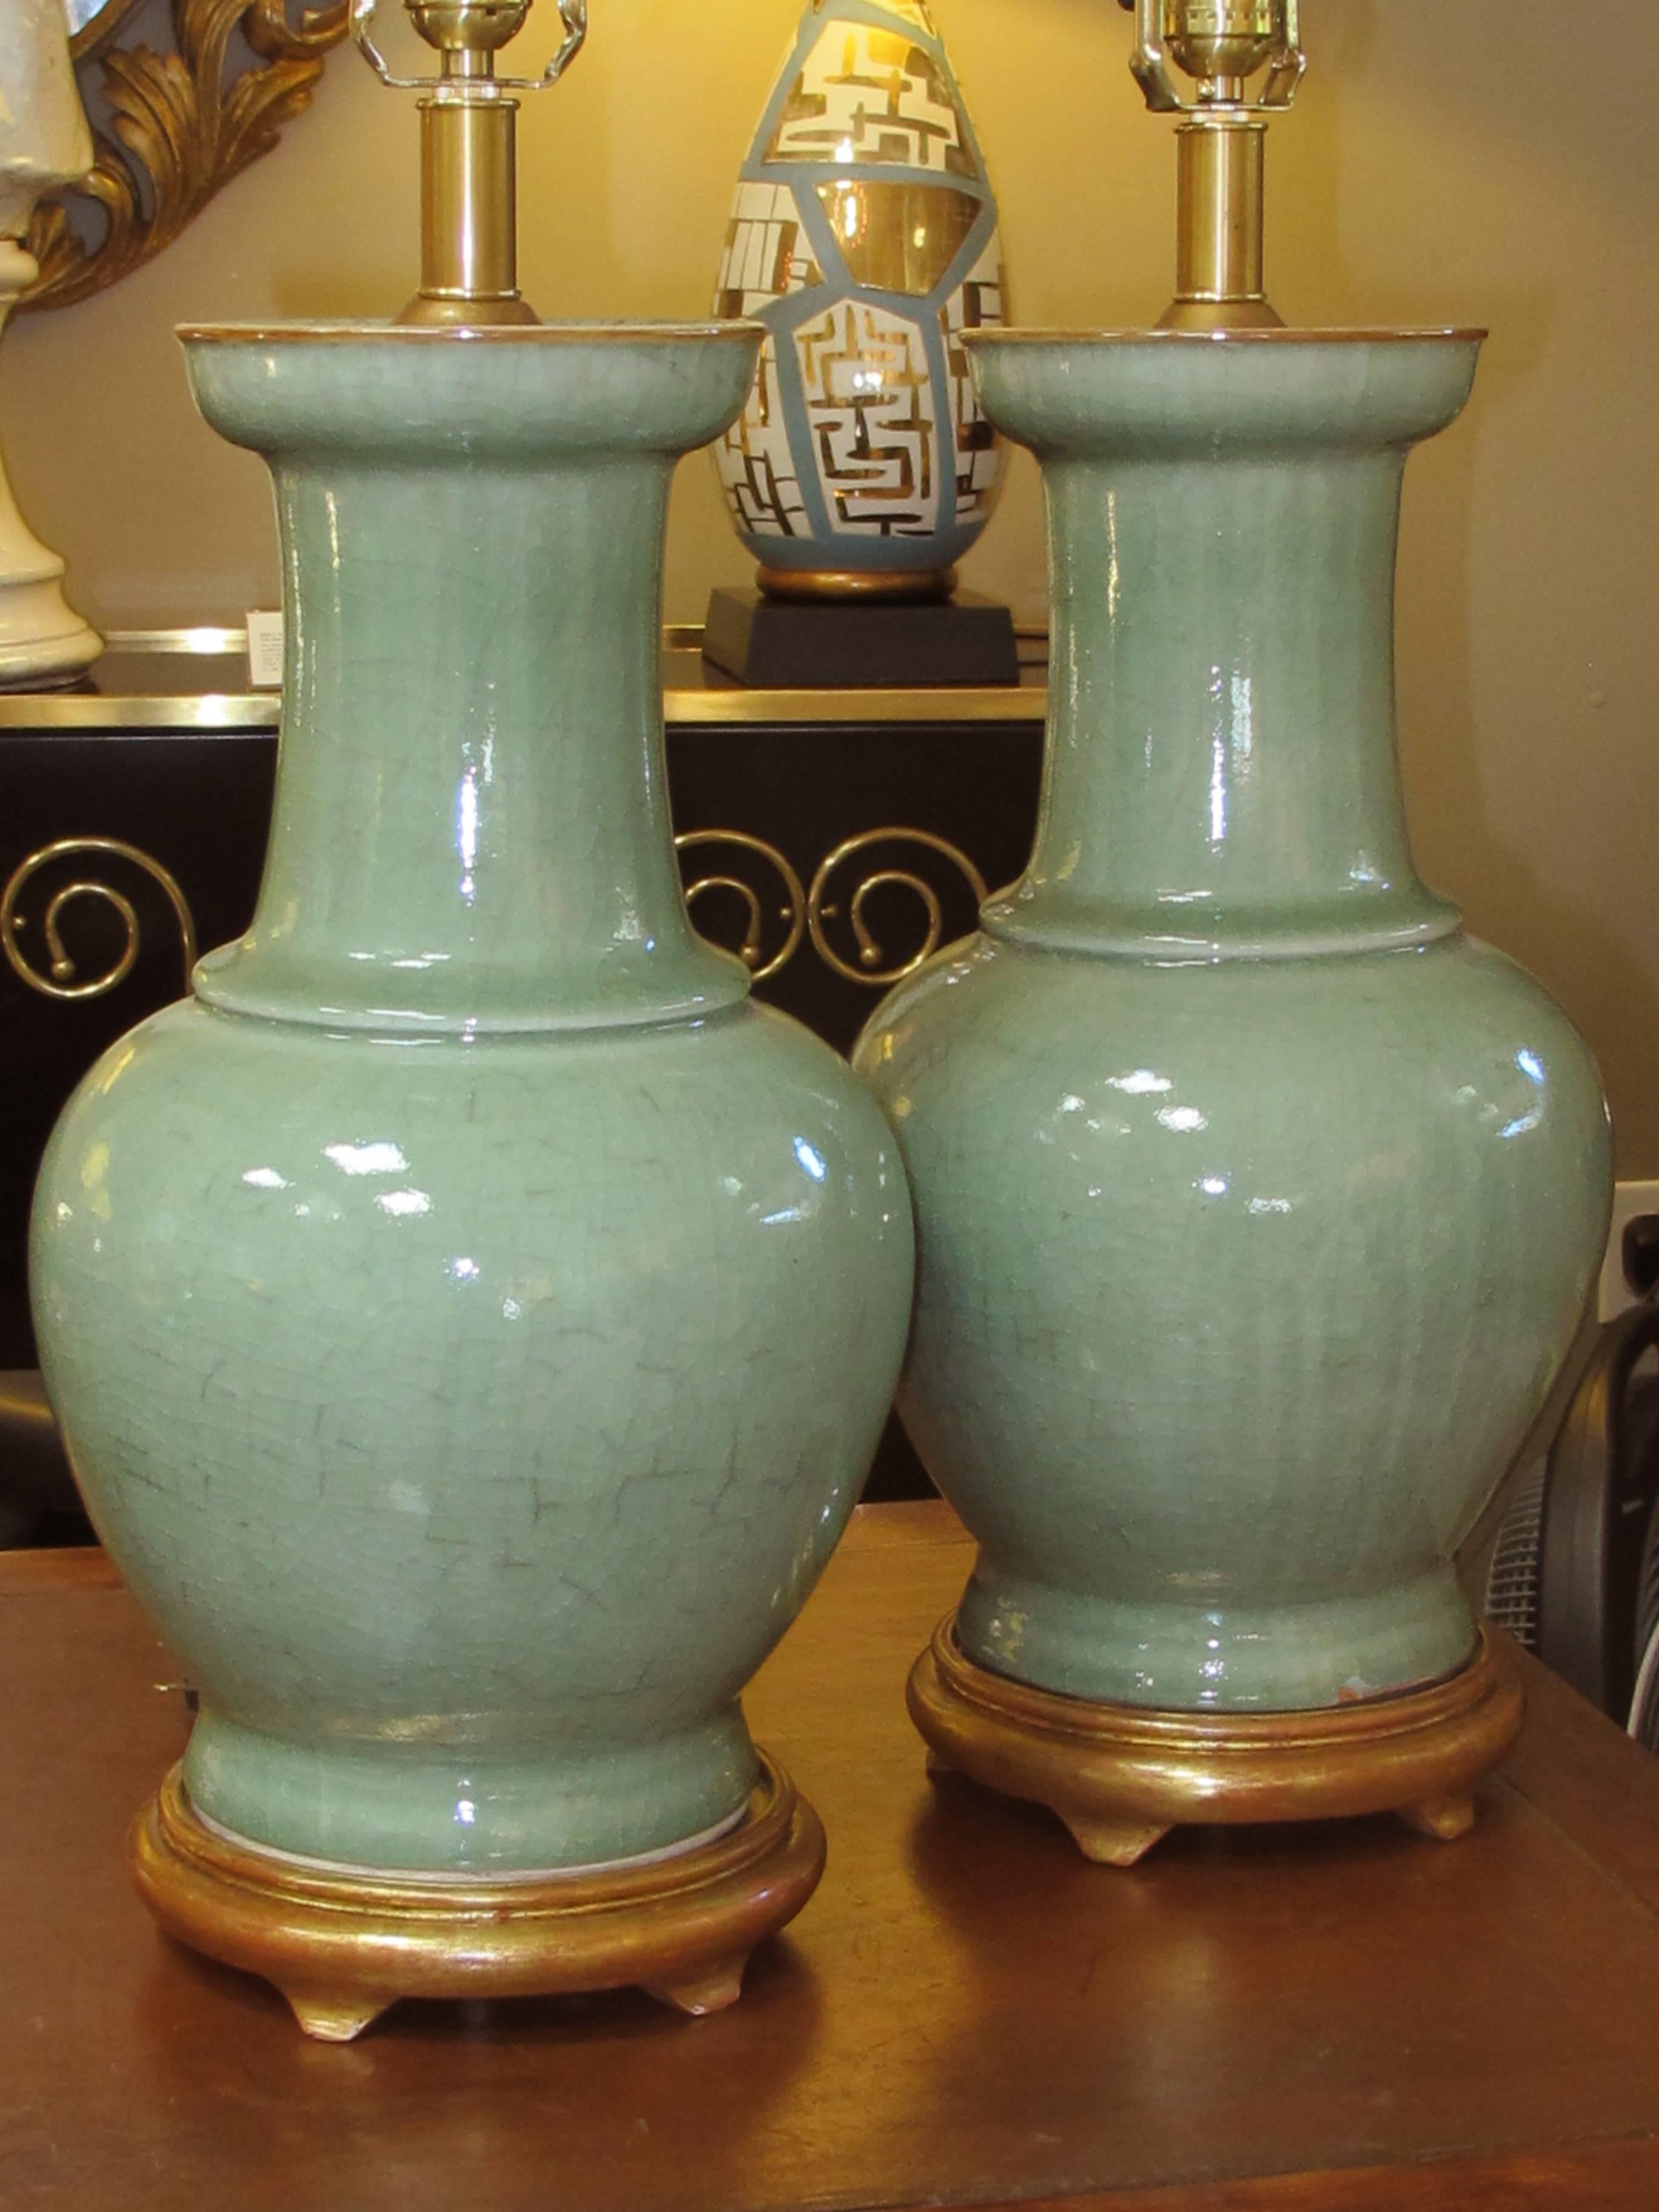 These classic lamps each with impressive size with a lovely celadon glaze all raised on a gilt-wood base; with fine overall craquelure and wear with ash glaze remnants.